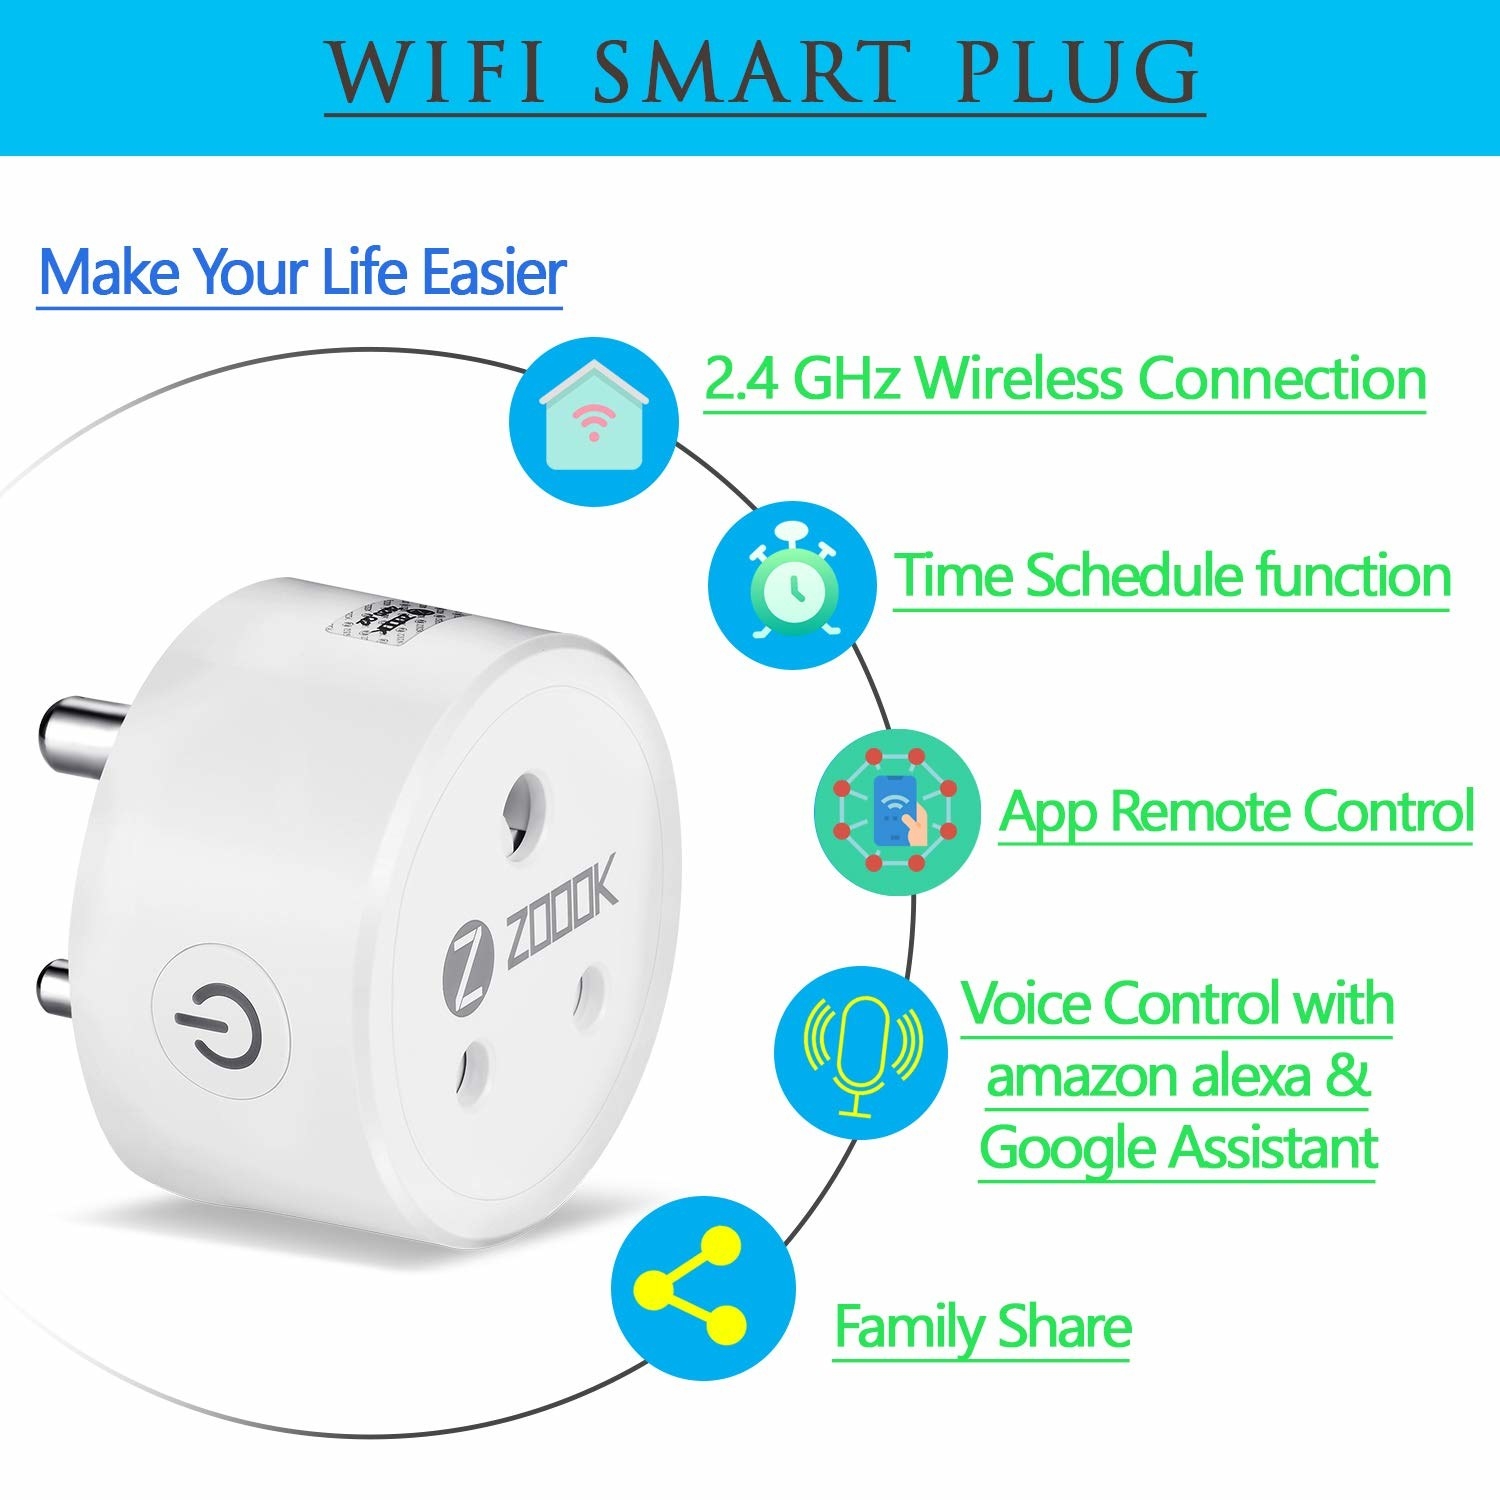 A Zoook smart plug in white, with various listed features such as &quot;Time Schedule Function&quot; and &quot;Voice Control with Amazon Alexa and Google Assistant&quot;.